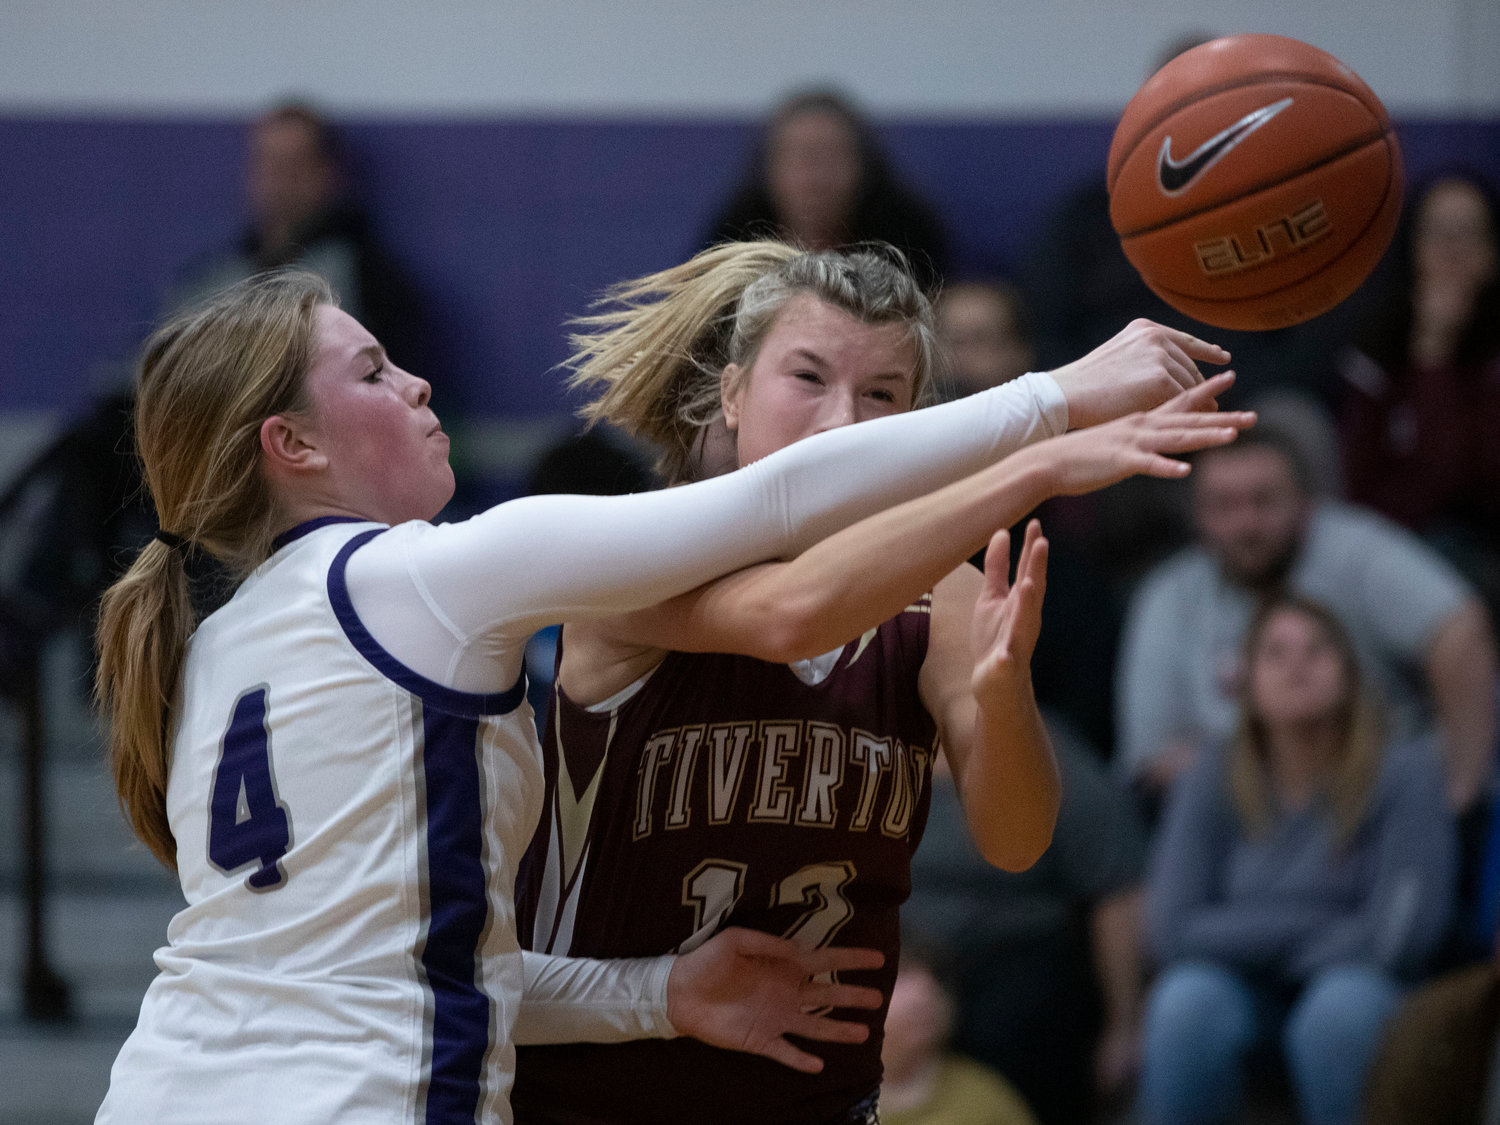 Lilly DaSilveira (left) knocks the ball away from Katie Richardson as she drives in for a layup.